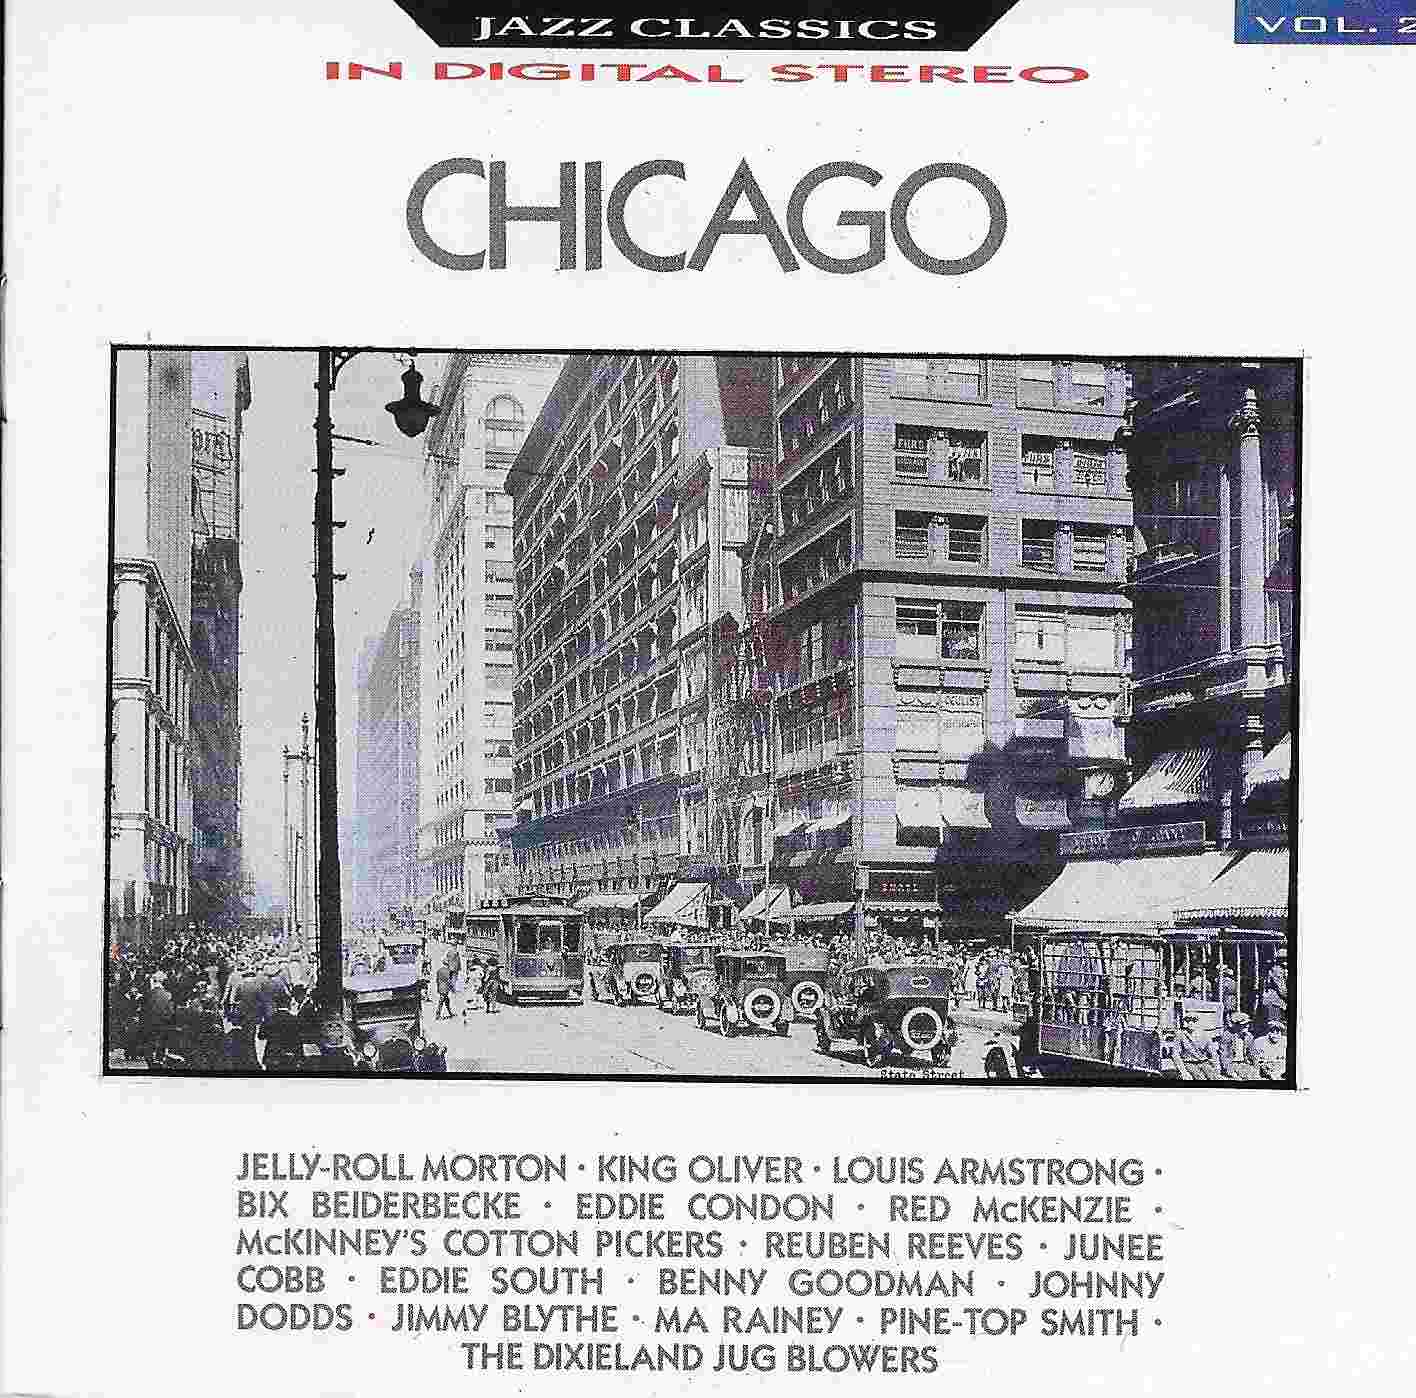 Picture of Jazz Classics - Volume 2, Chicago by artist Various from the BBC cds - Records and Tapes library